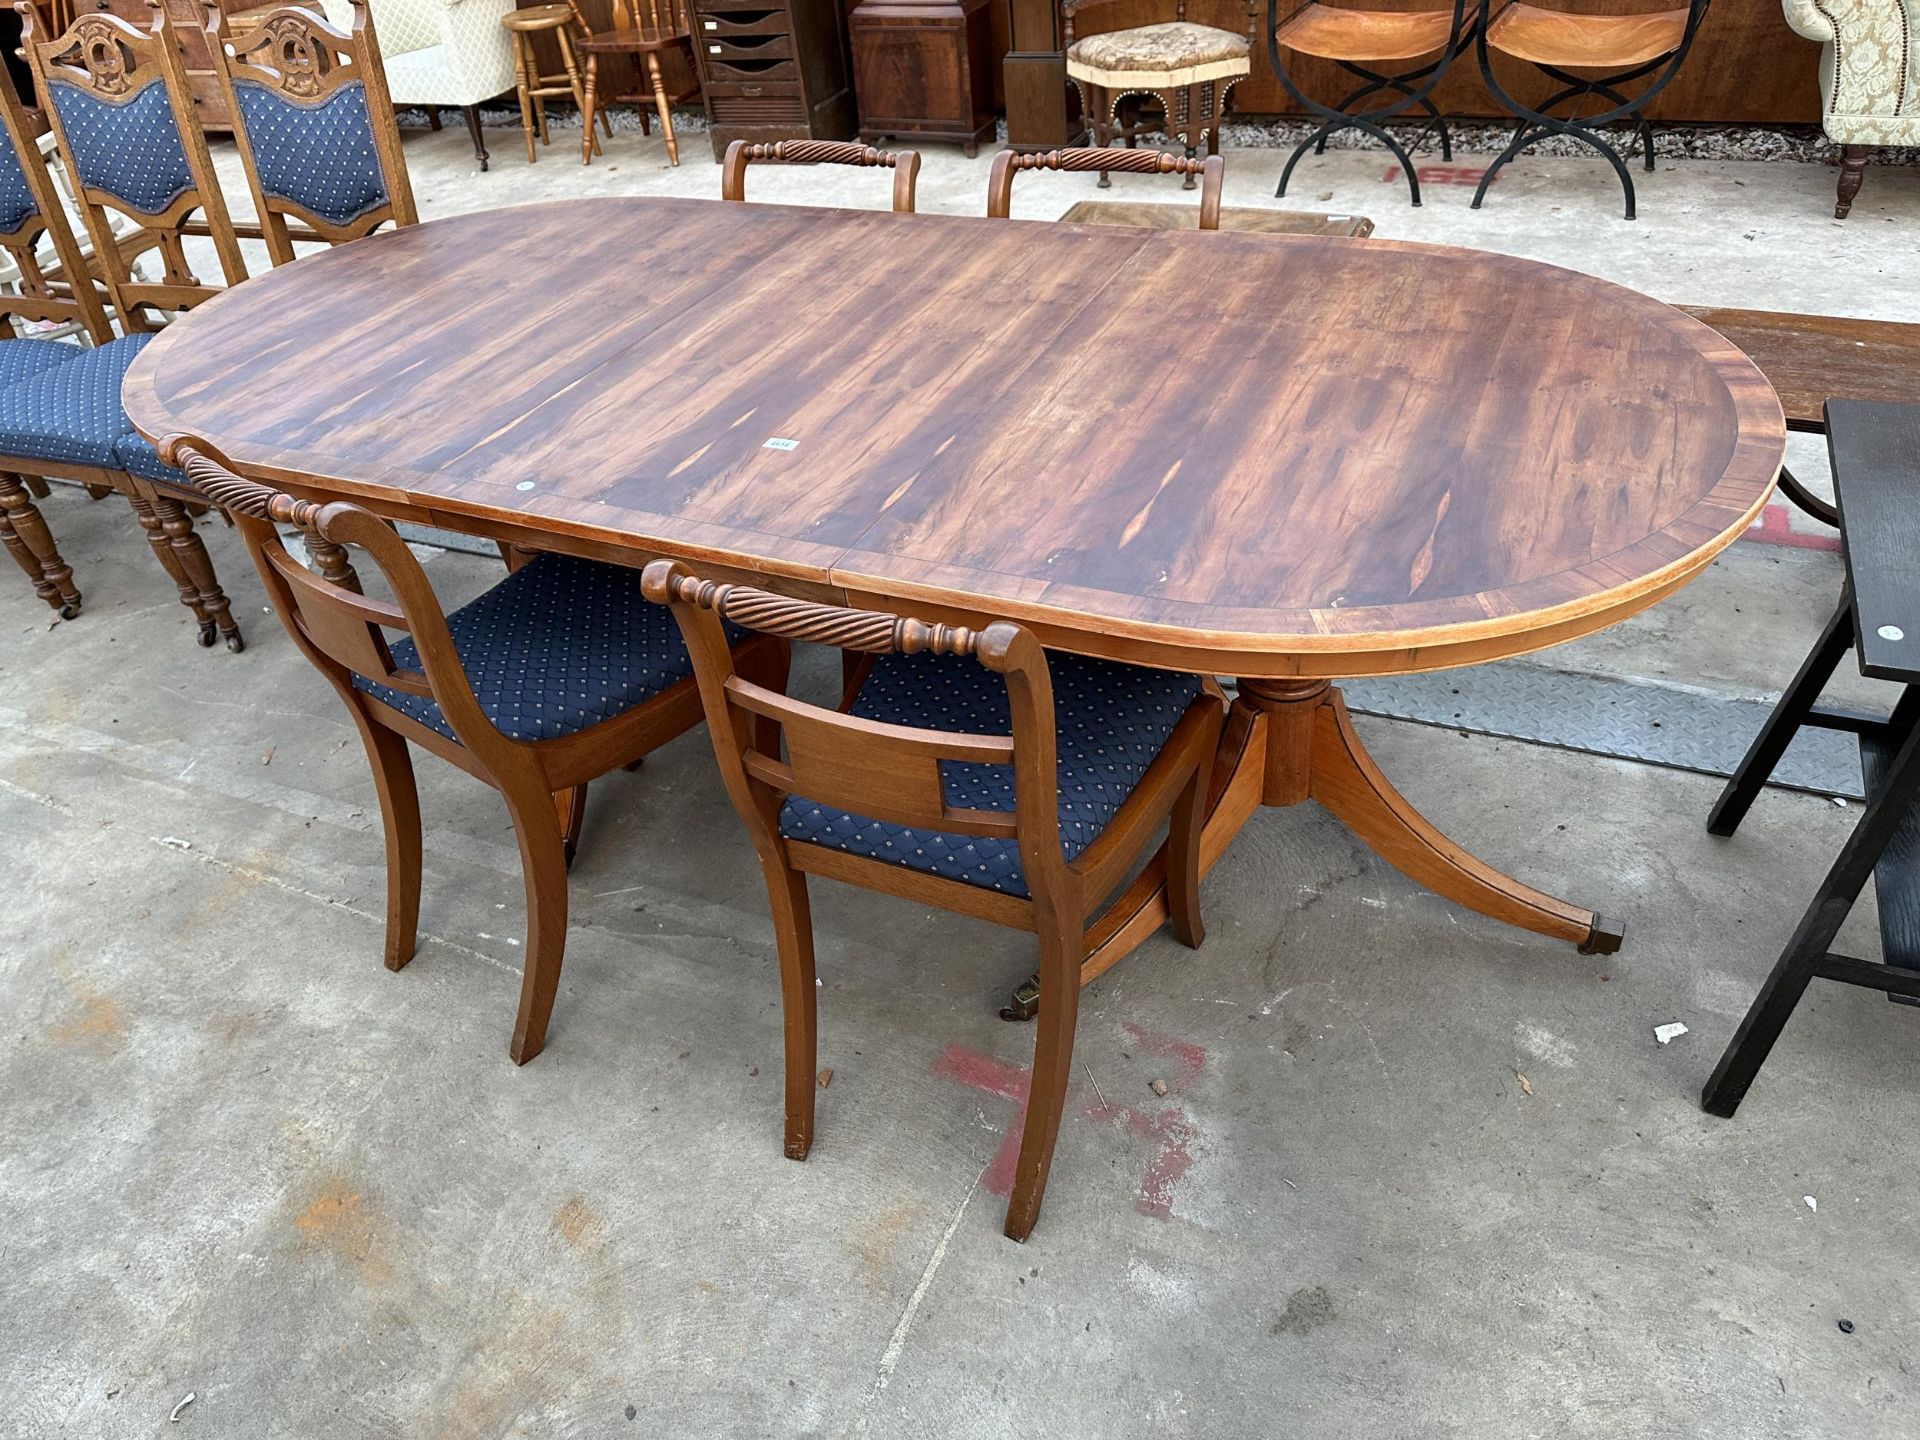 A REGENCY STYLE YEW WOOD CROSSBANDED TWIN PEDESTAL EXTENDING DINING TABLE 64" X 39.5" (LEAF 21.5")